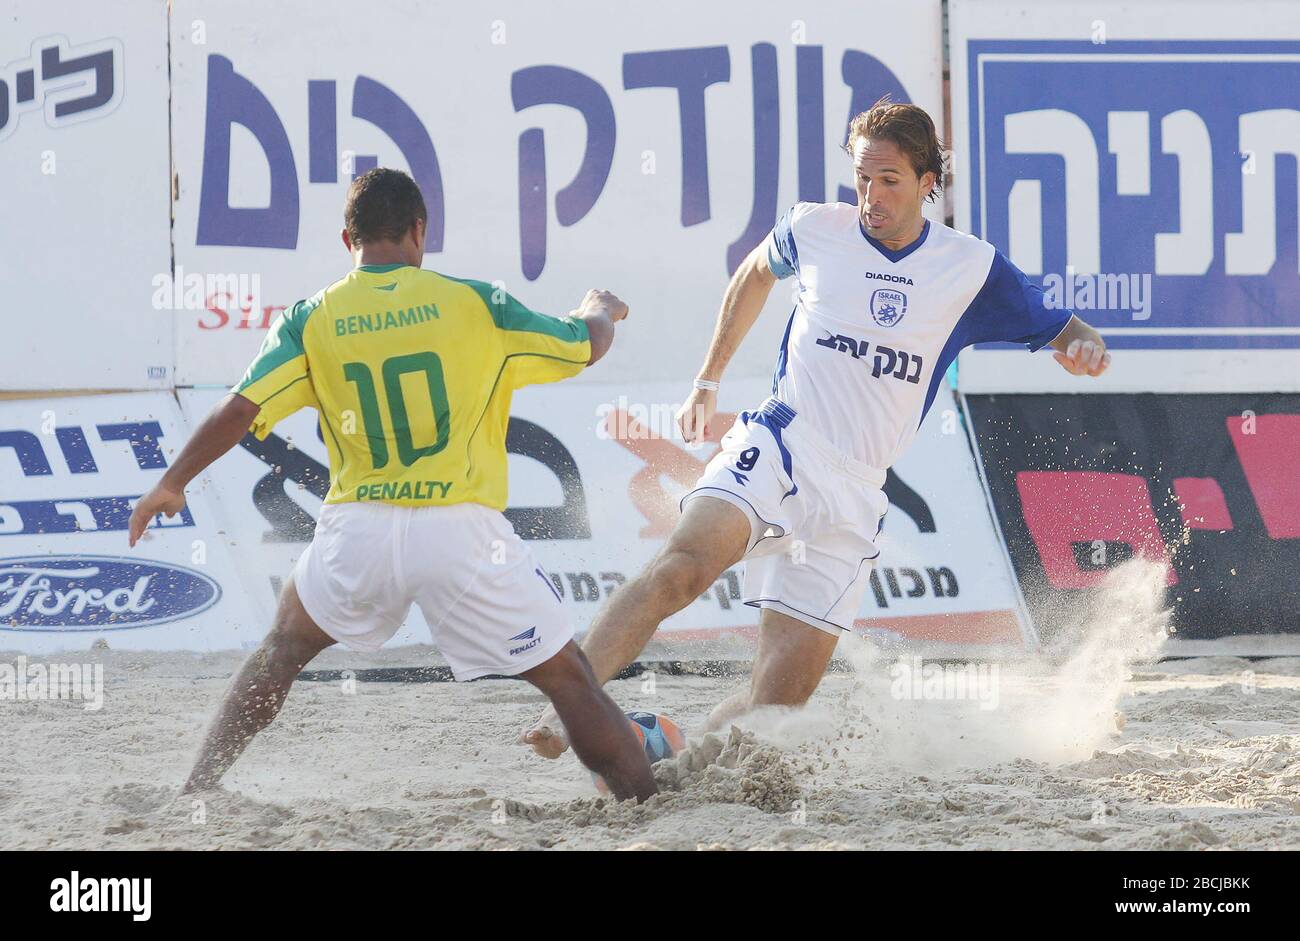 'Photo from the friendly match (called the Solidarity Cup) between the Israeli and the Brazilian beach soccer teams, that occured on 11 July 2008, at the Poleg beach in Netanya. The game was played to note 60 years of Israeli independence.; 11 July 2008; The spokesman of the Israeli Beach Soccer League.; Israeli Beach Soccer League; ' Stock Photo